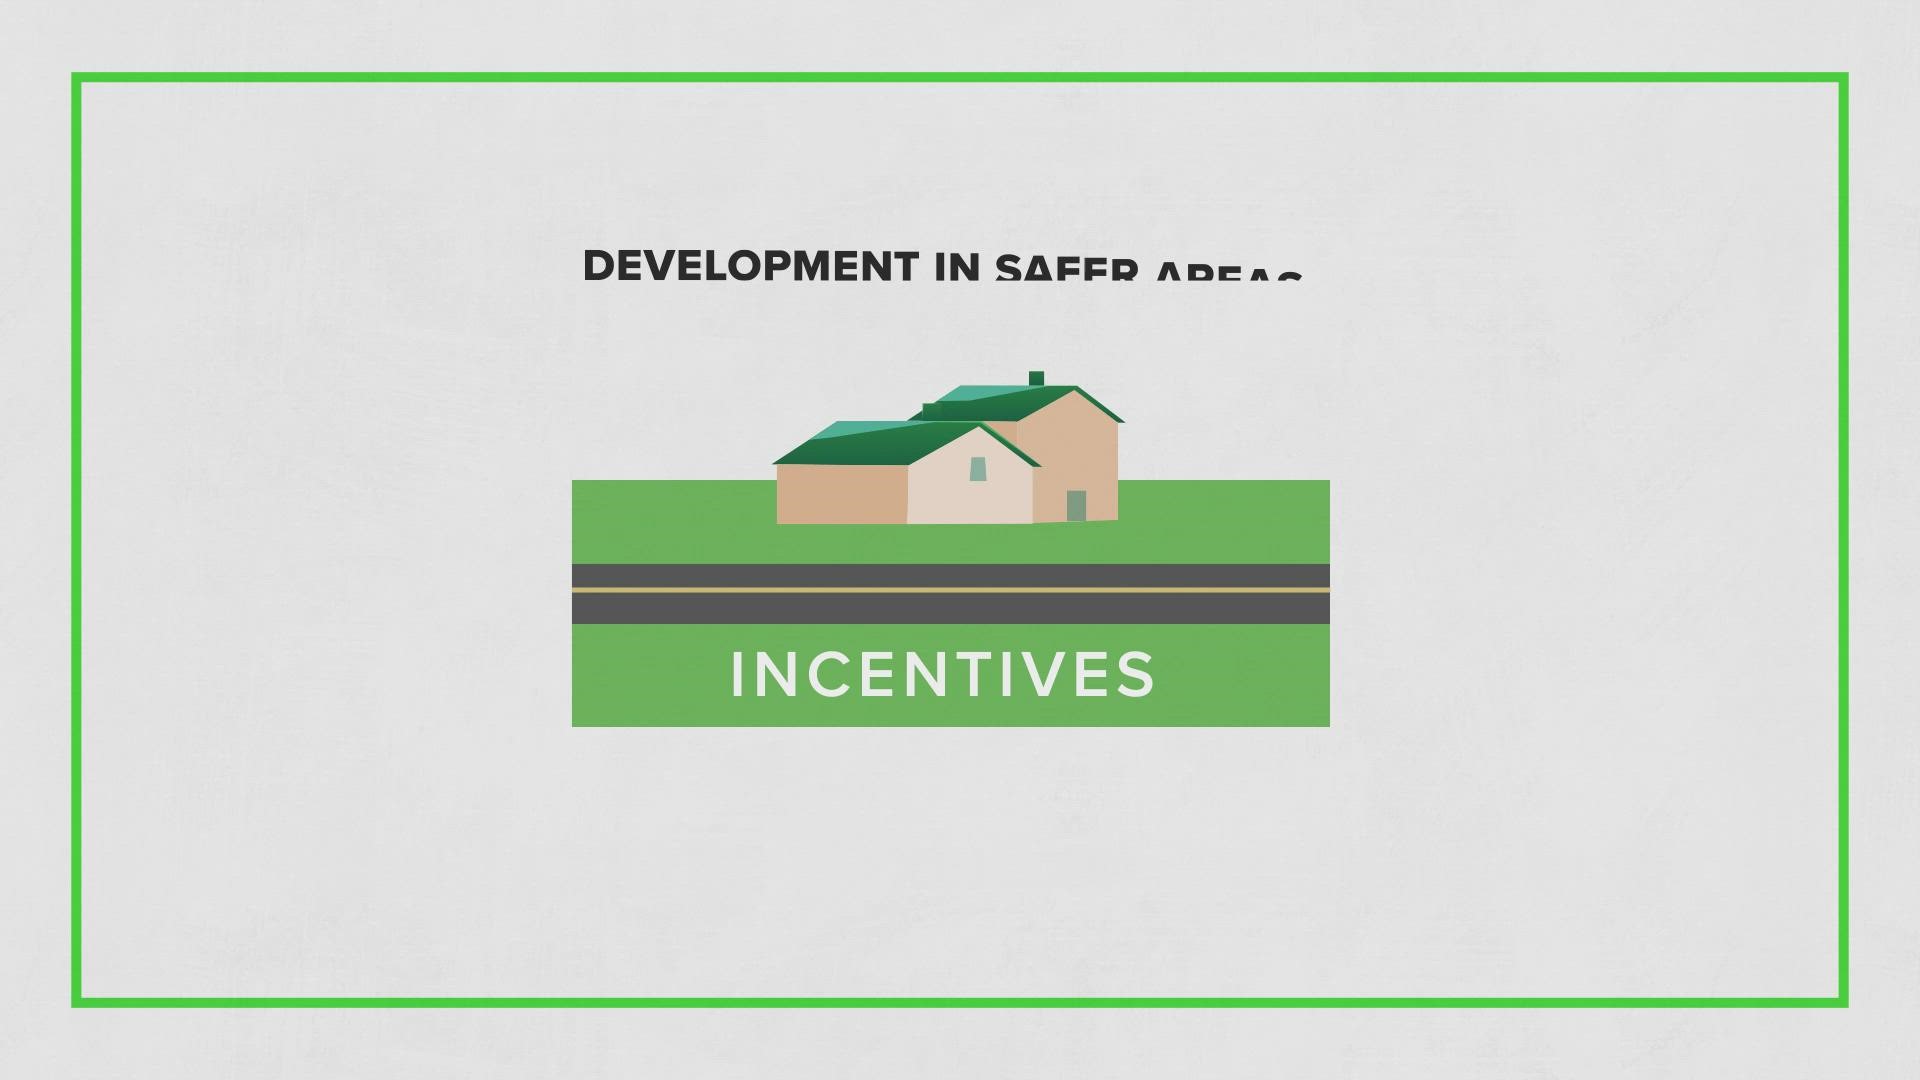 The program offers incentives to developers who want to build in safer areas if they buy out vulnerable homes and put the land in a conservation easement.